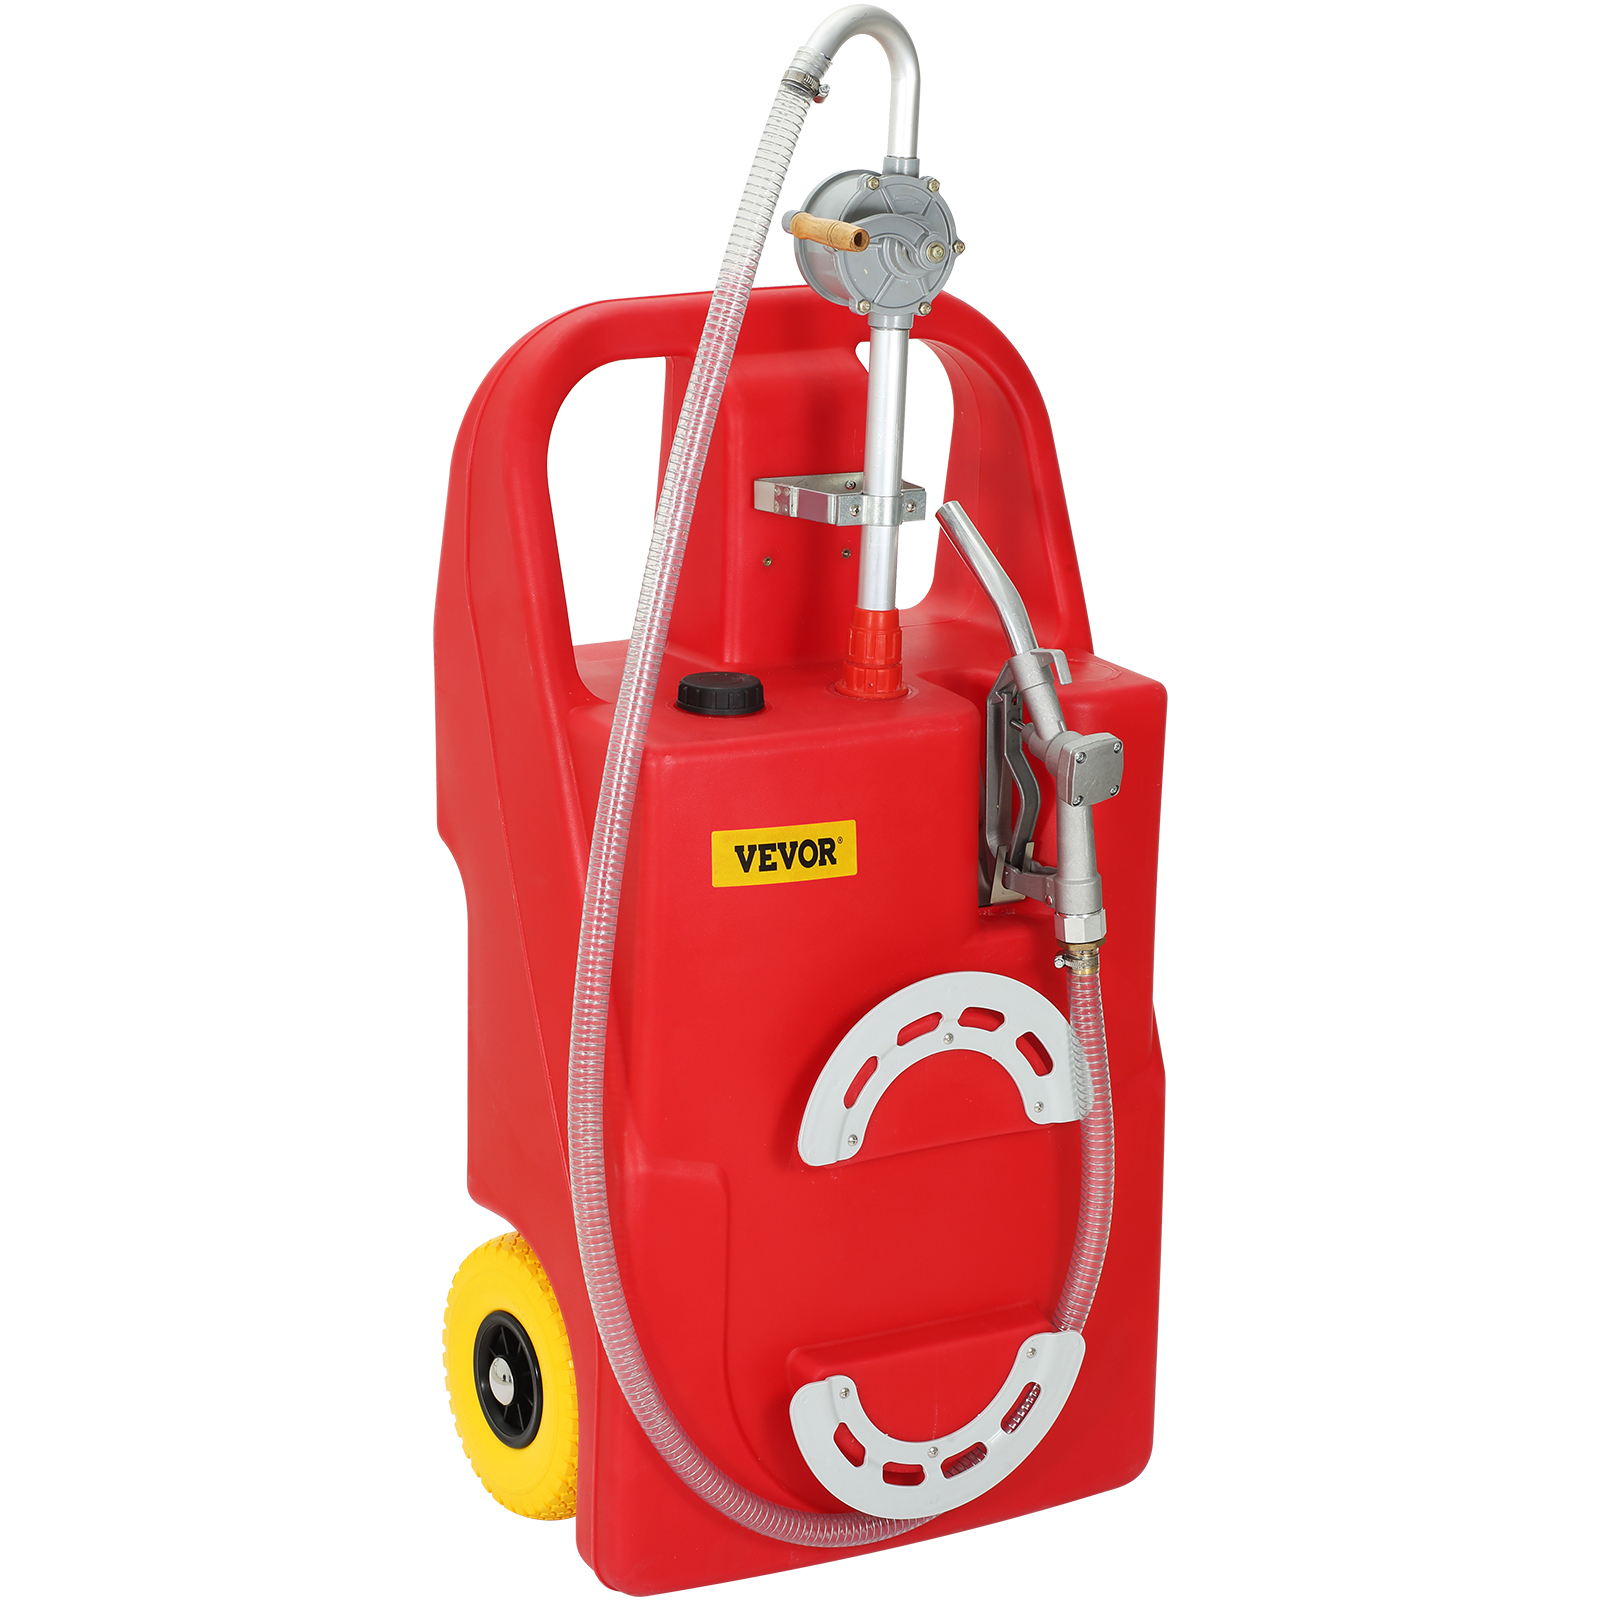 Don Hierro 15 Gallons Steel Manual Lift